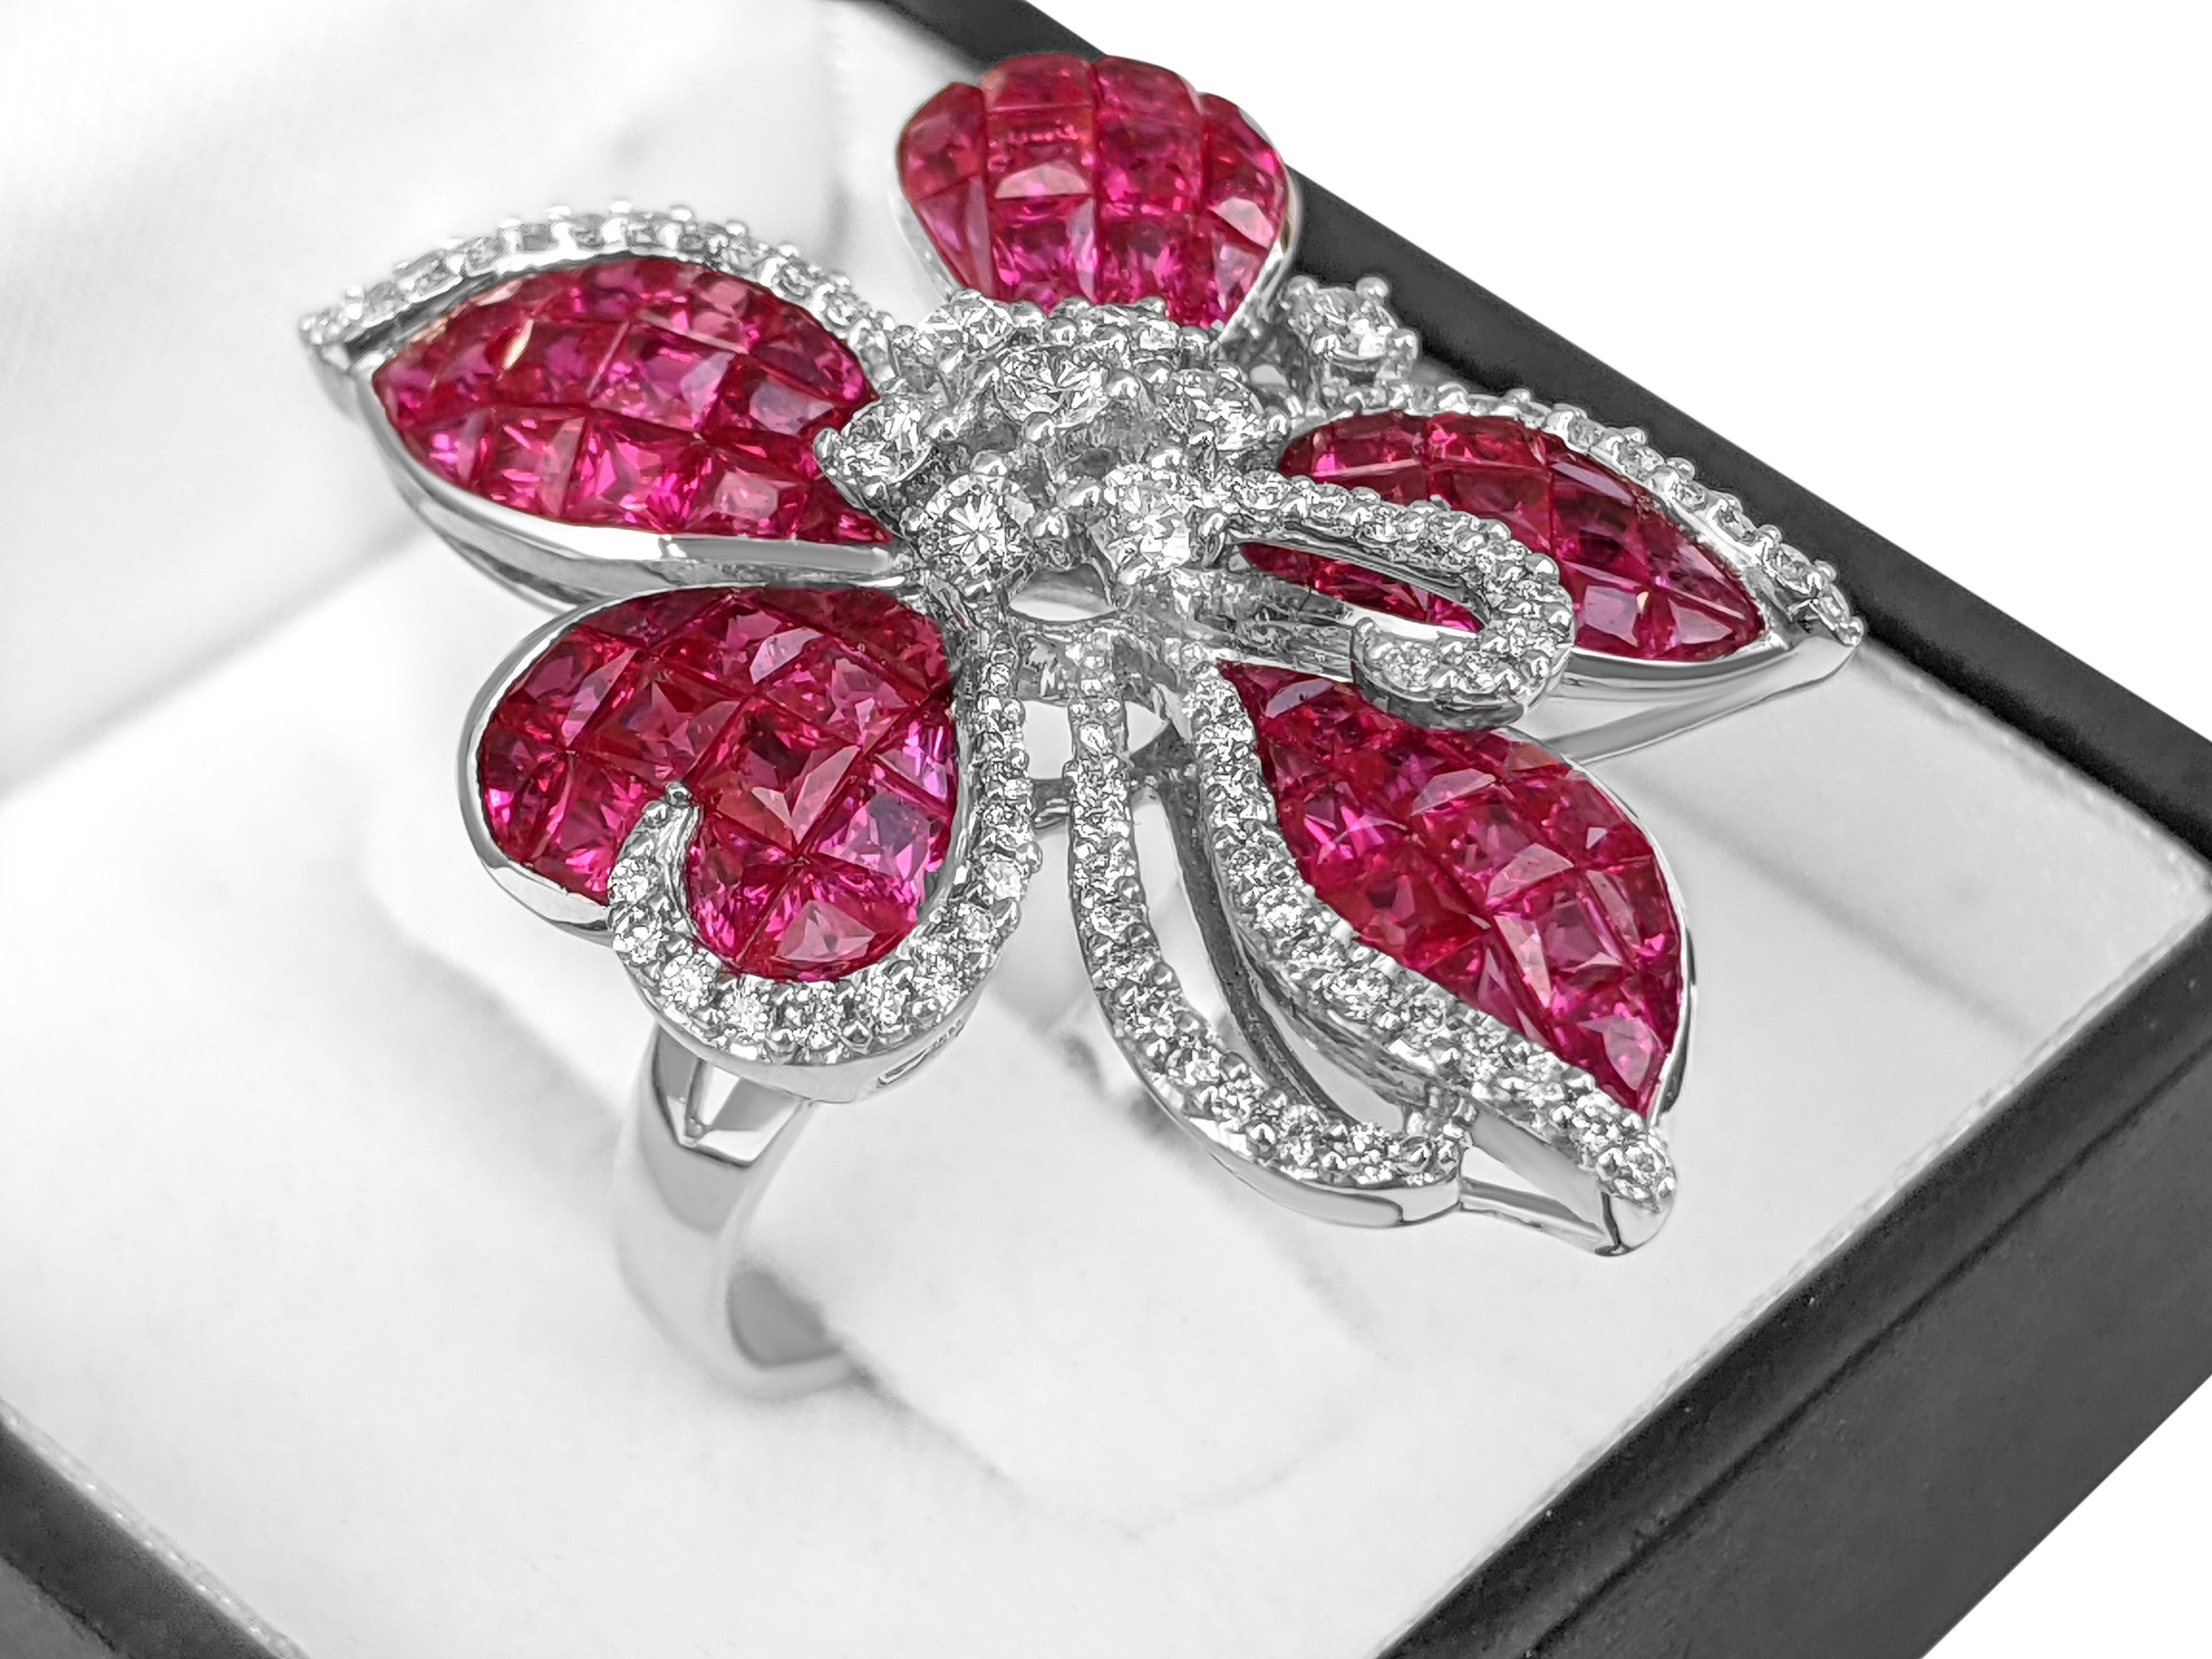 Mixed Cut $1 NO RESERVE! - AAA 5.01 Carat Red Ruby & 0.63ct Diamonds, 18K White Gold Ring